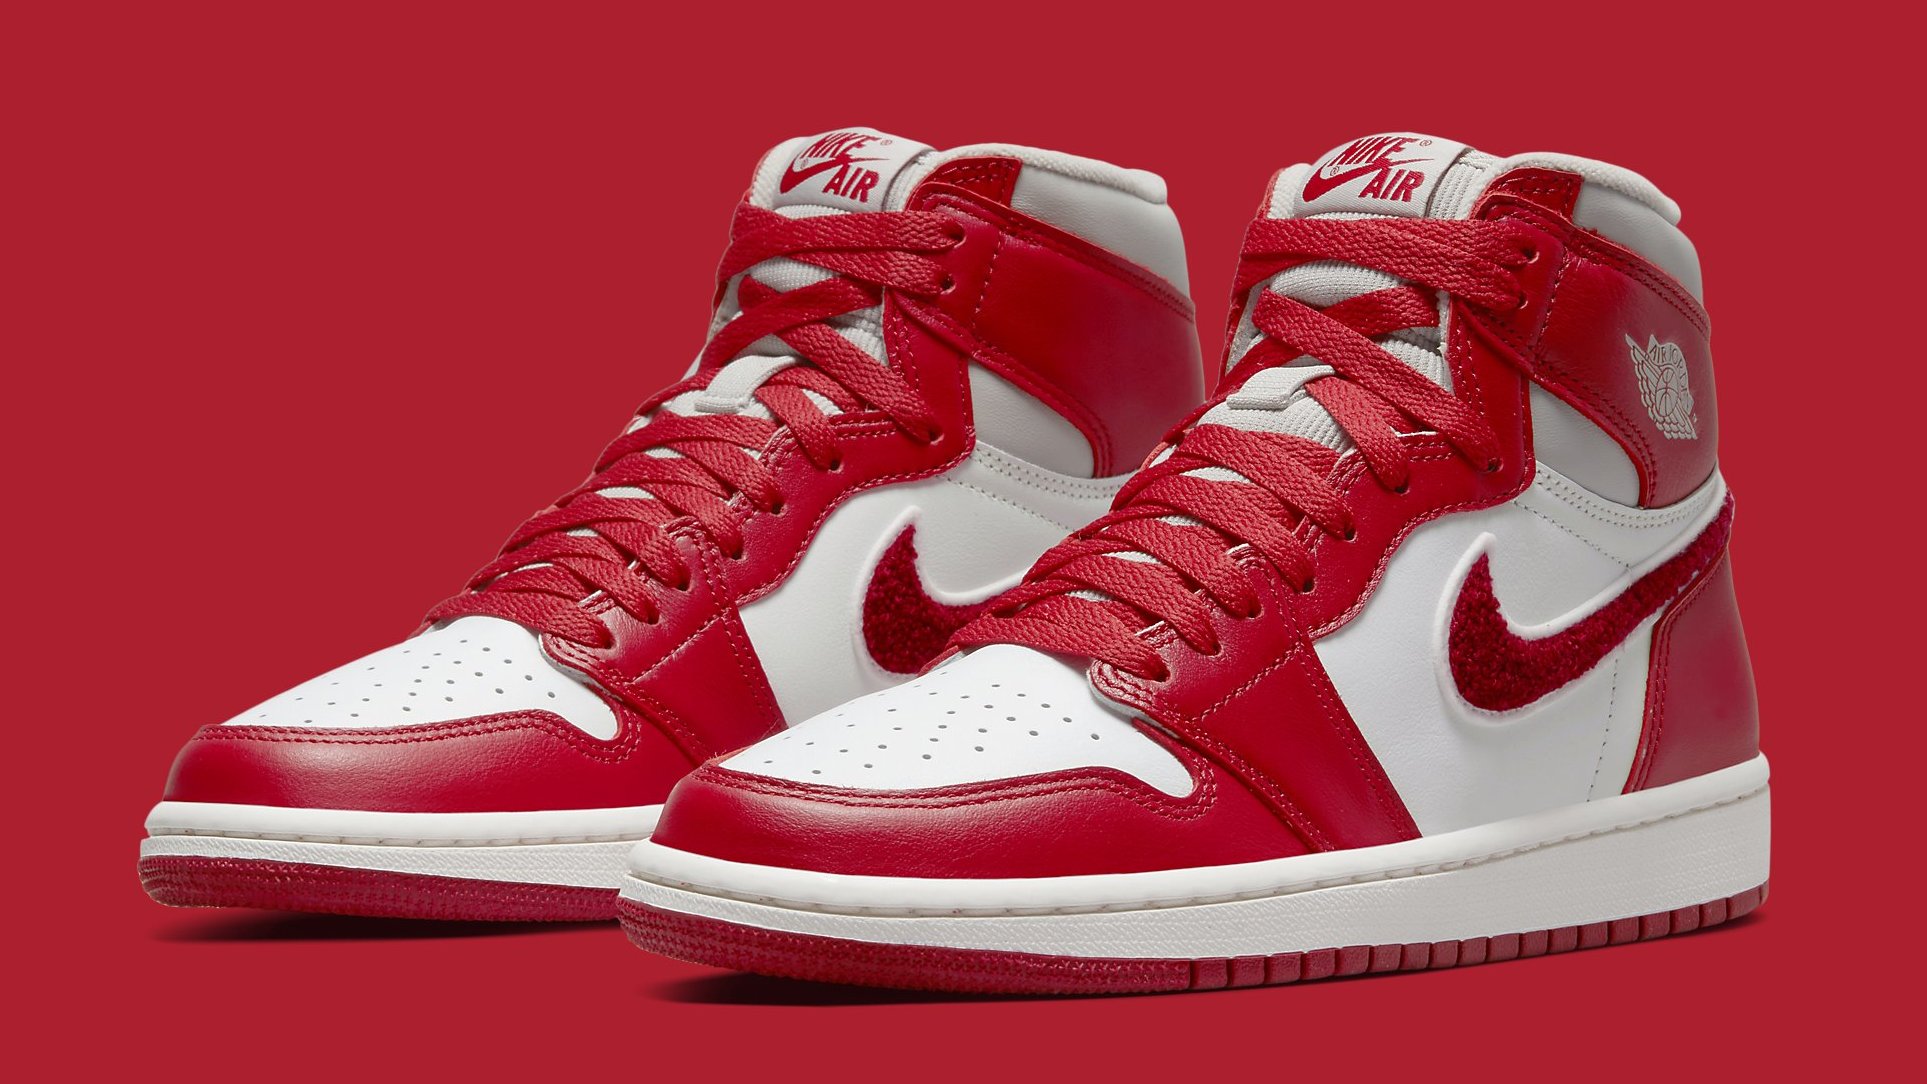 The 'Chenille' Air Jordan 1 Releases This Month Complex